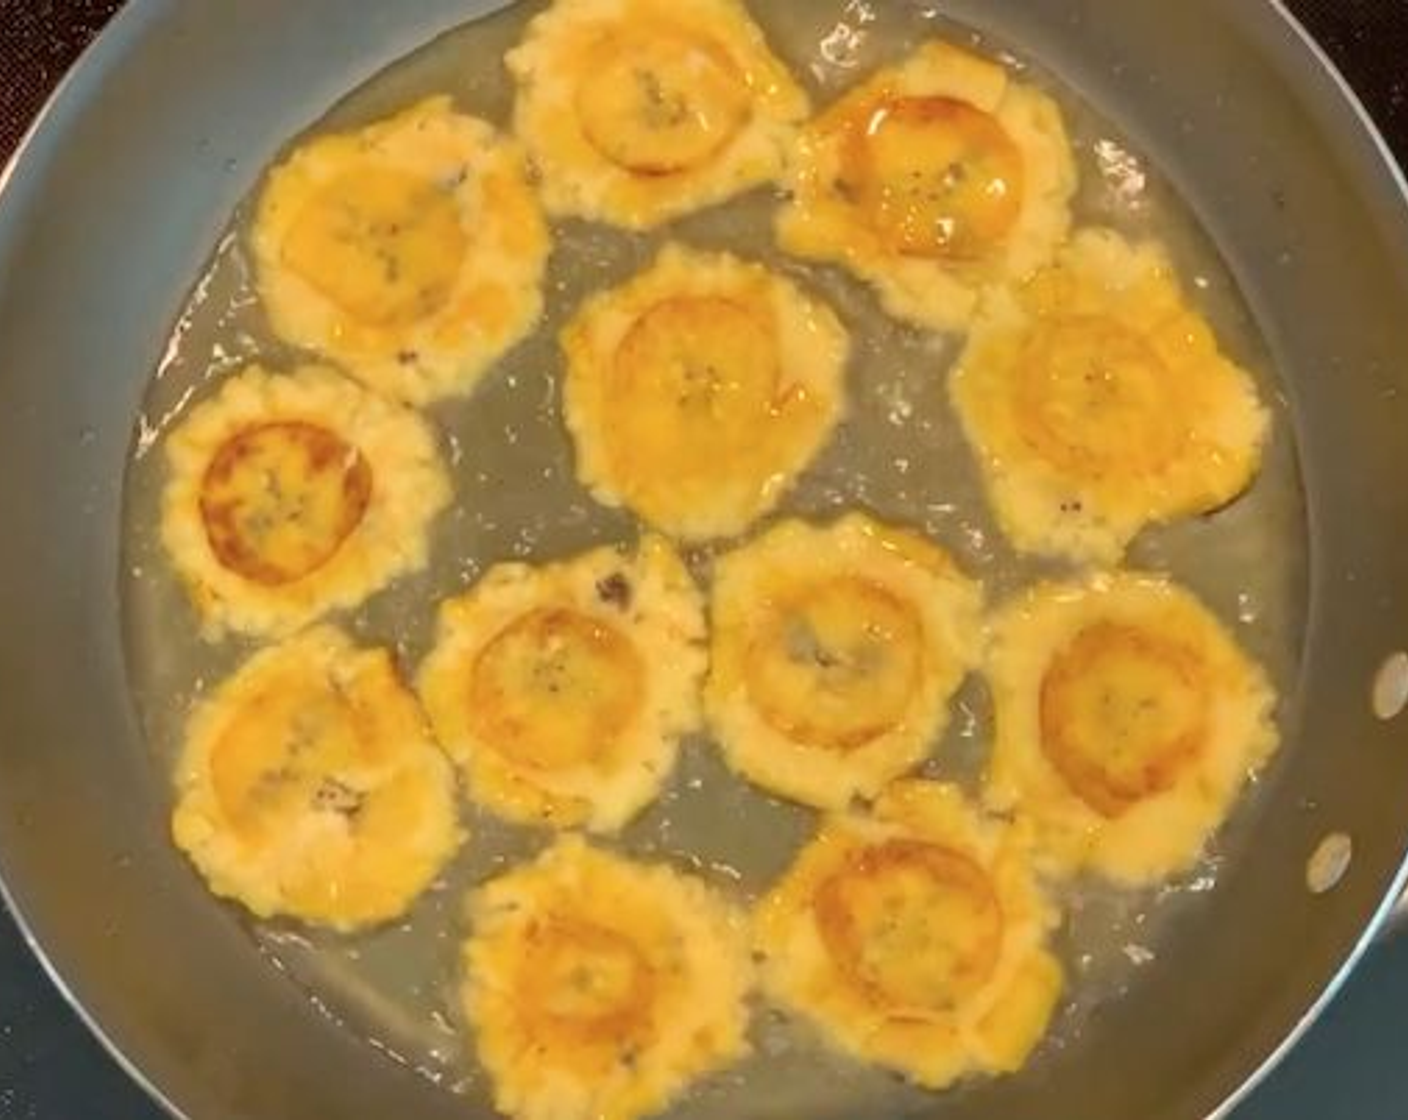 step 4 Take the green plantain circles and flatten them. You can smash them with the bottom of a plate, pan, or cup. Put the flattened plantains back in the oil and fry for another 2-3 minutes until nice and crunchy. Remove the plantains and drain them on paper towels.